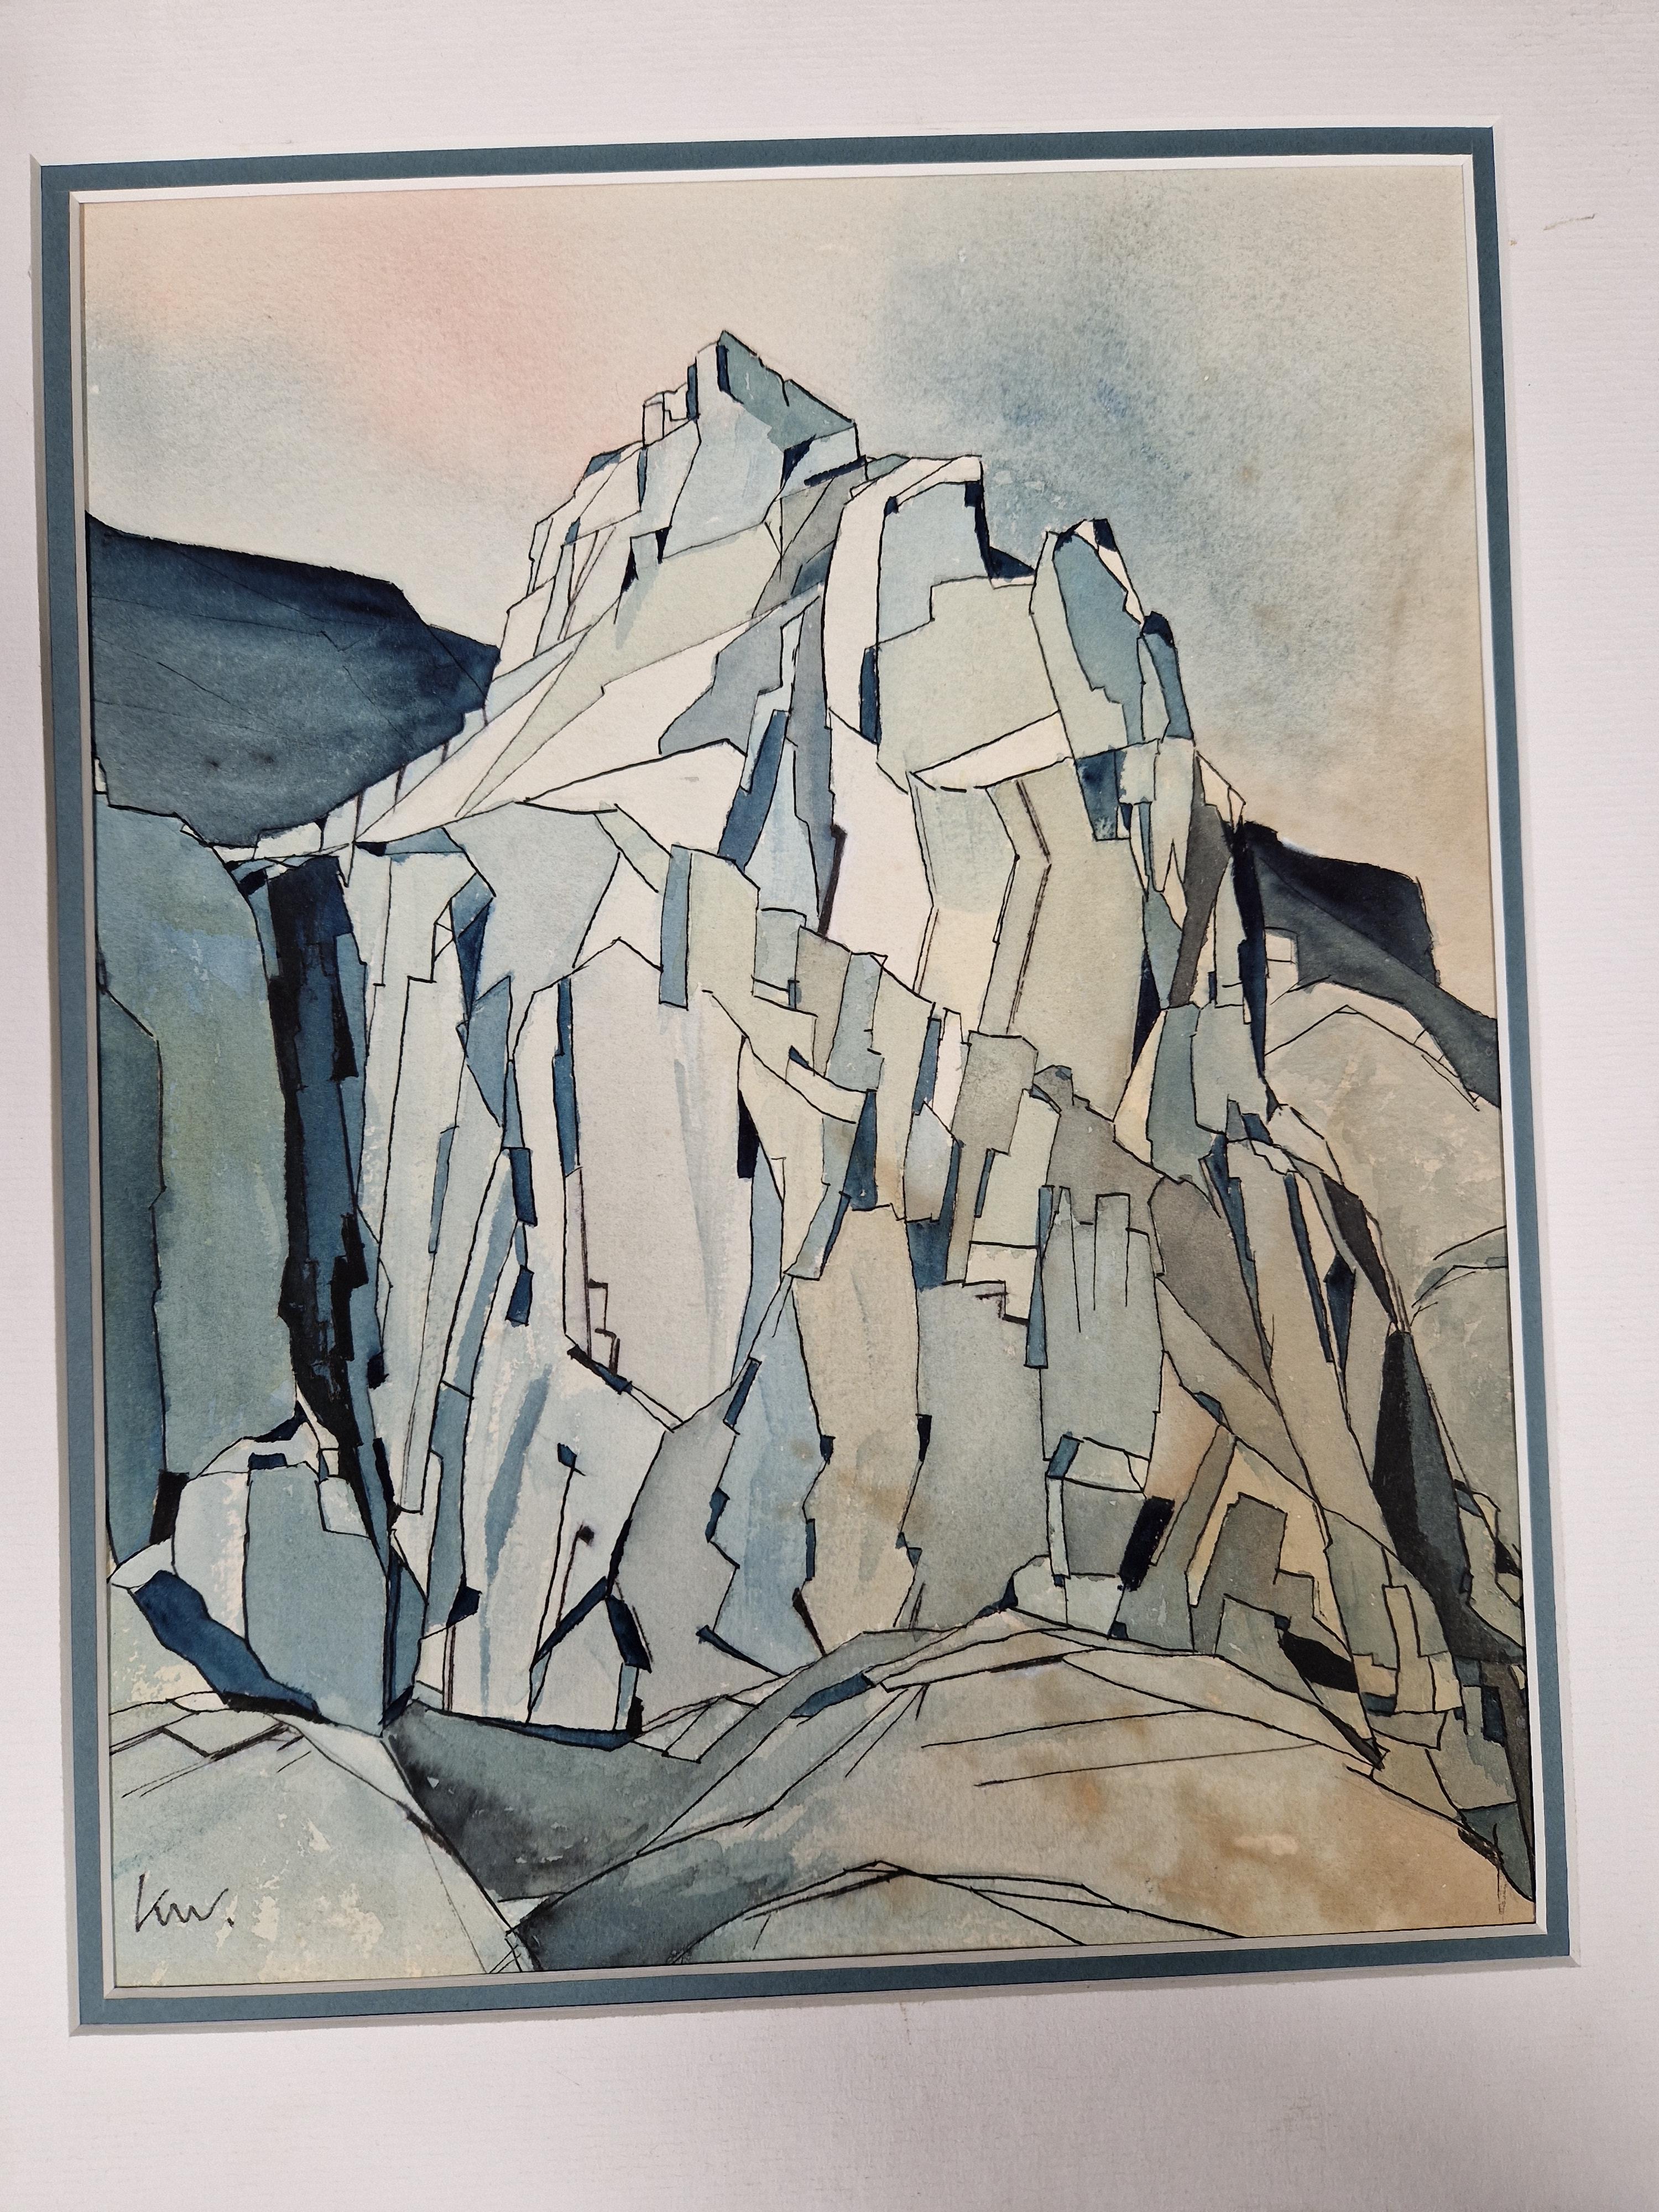 MANNER OF KYFFIN WILLIAMS (20th C. BRITISH SCHOOL) THE ROCK FACE, INITIALLED, WATERCOLOUR. 31 x - Image 8 of 8